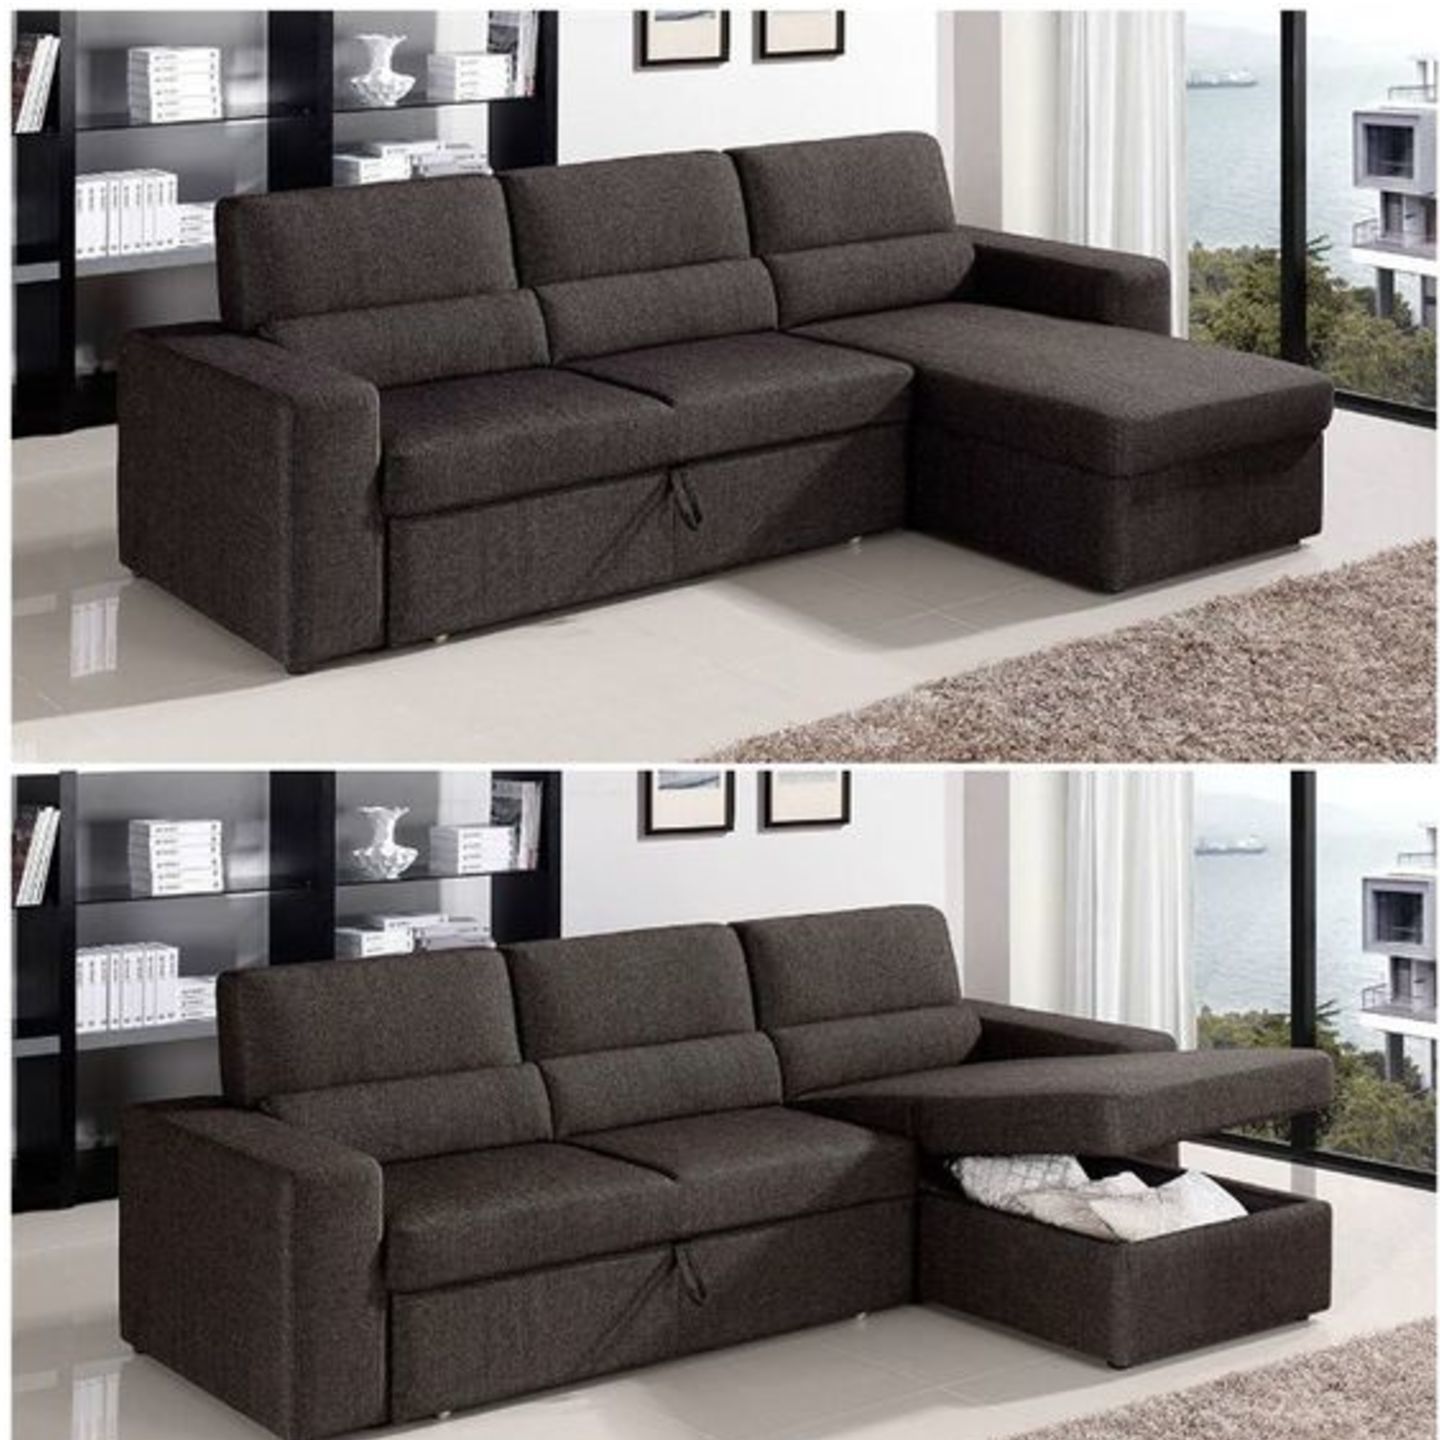 NF Corner Sofa Cam Bed With Lounger DD-201 In Grey Colour